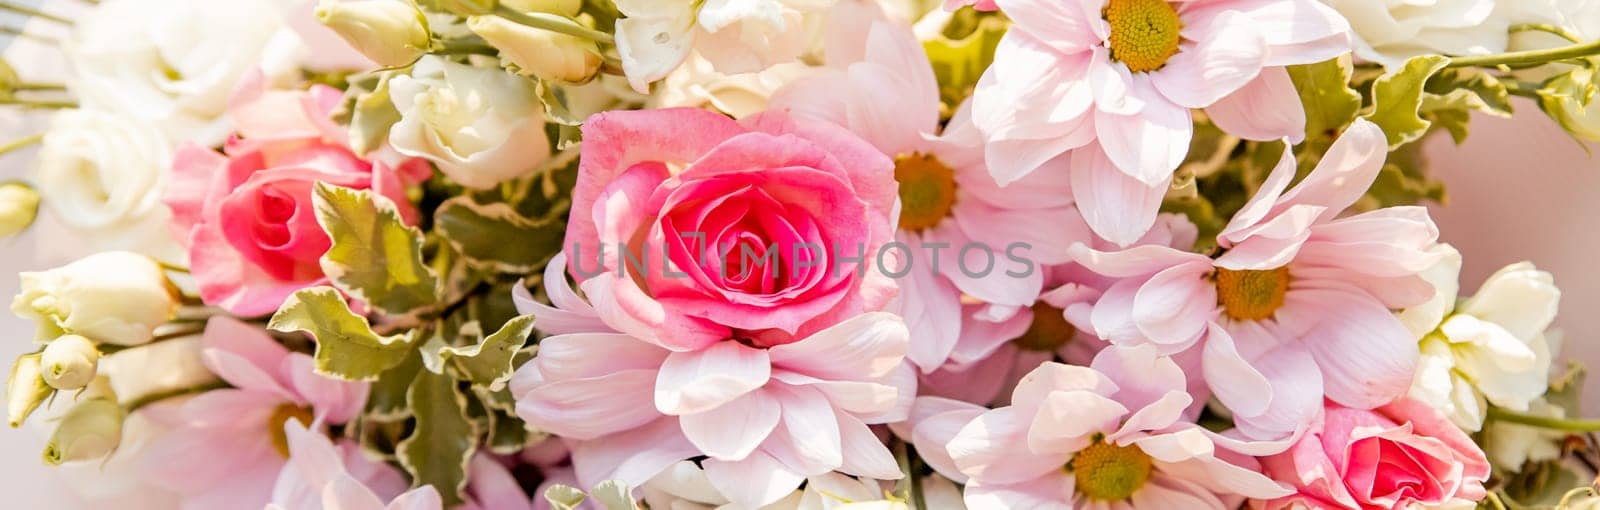 Modern floral bouquet of different flowers, colorful bunch of flowers.pink roses, Chrysanthemum. daisy and Eustoma. Colorful postcard. Congratulation or present concept.web banner by YuliaYaspe1979